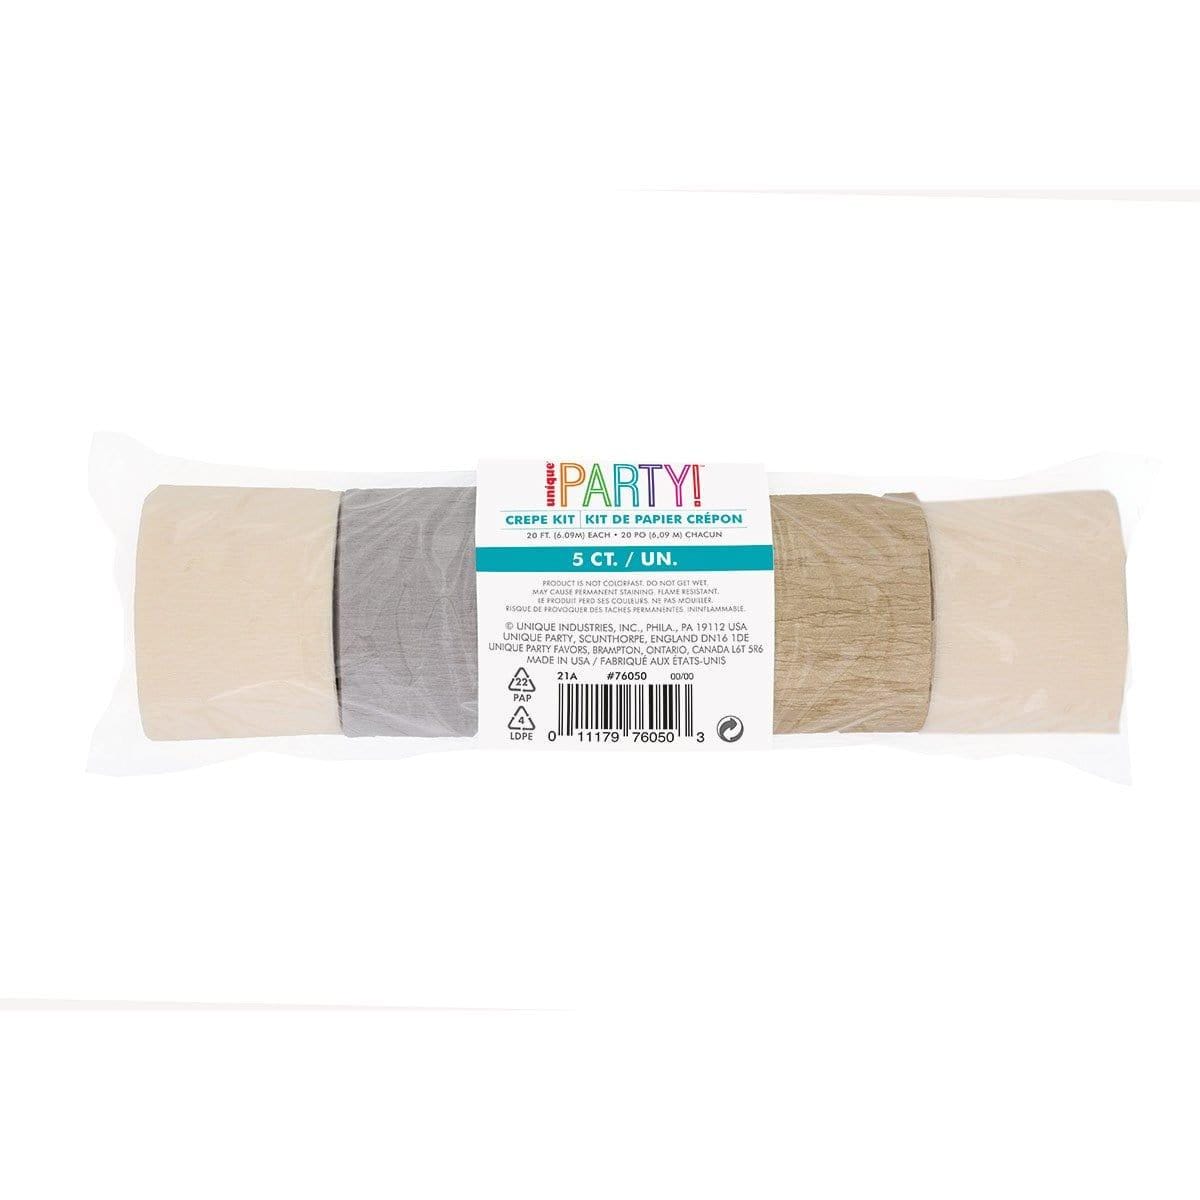 Buy General Birthday Gold Confetti Birthday Crepe Streamer Kit, 5 Count sold at Party Expert